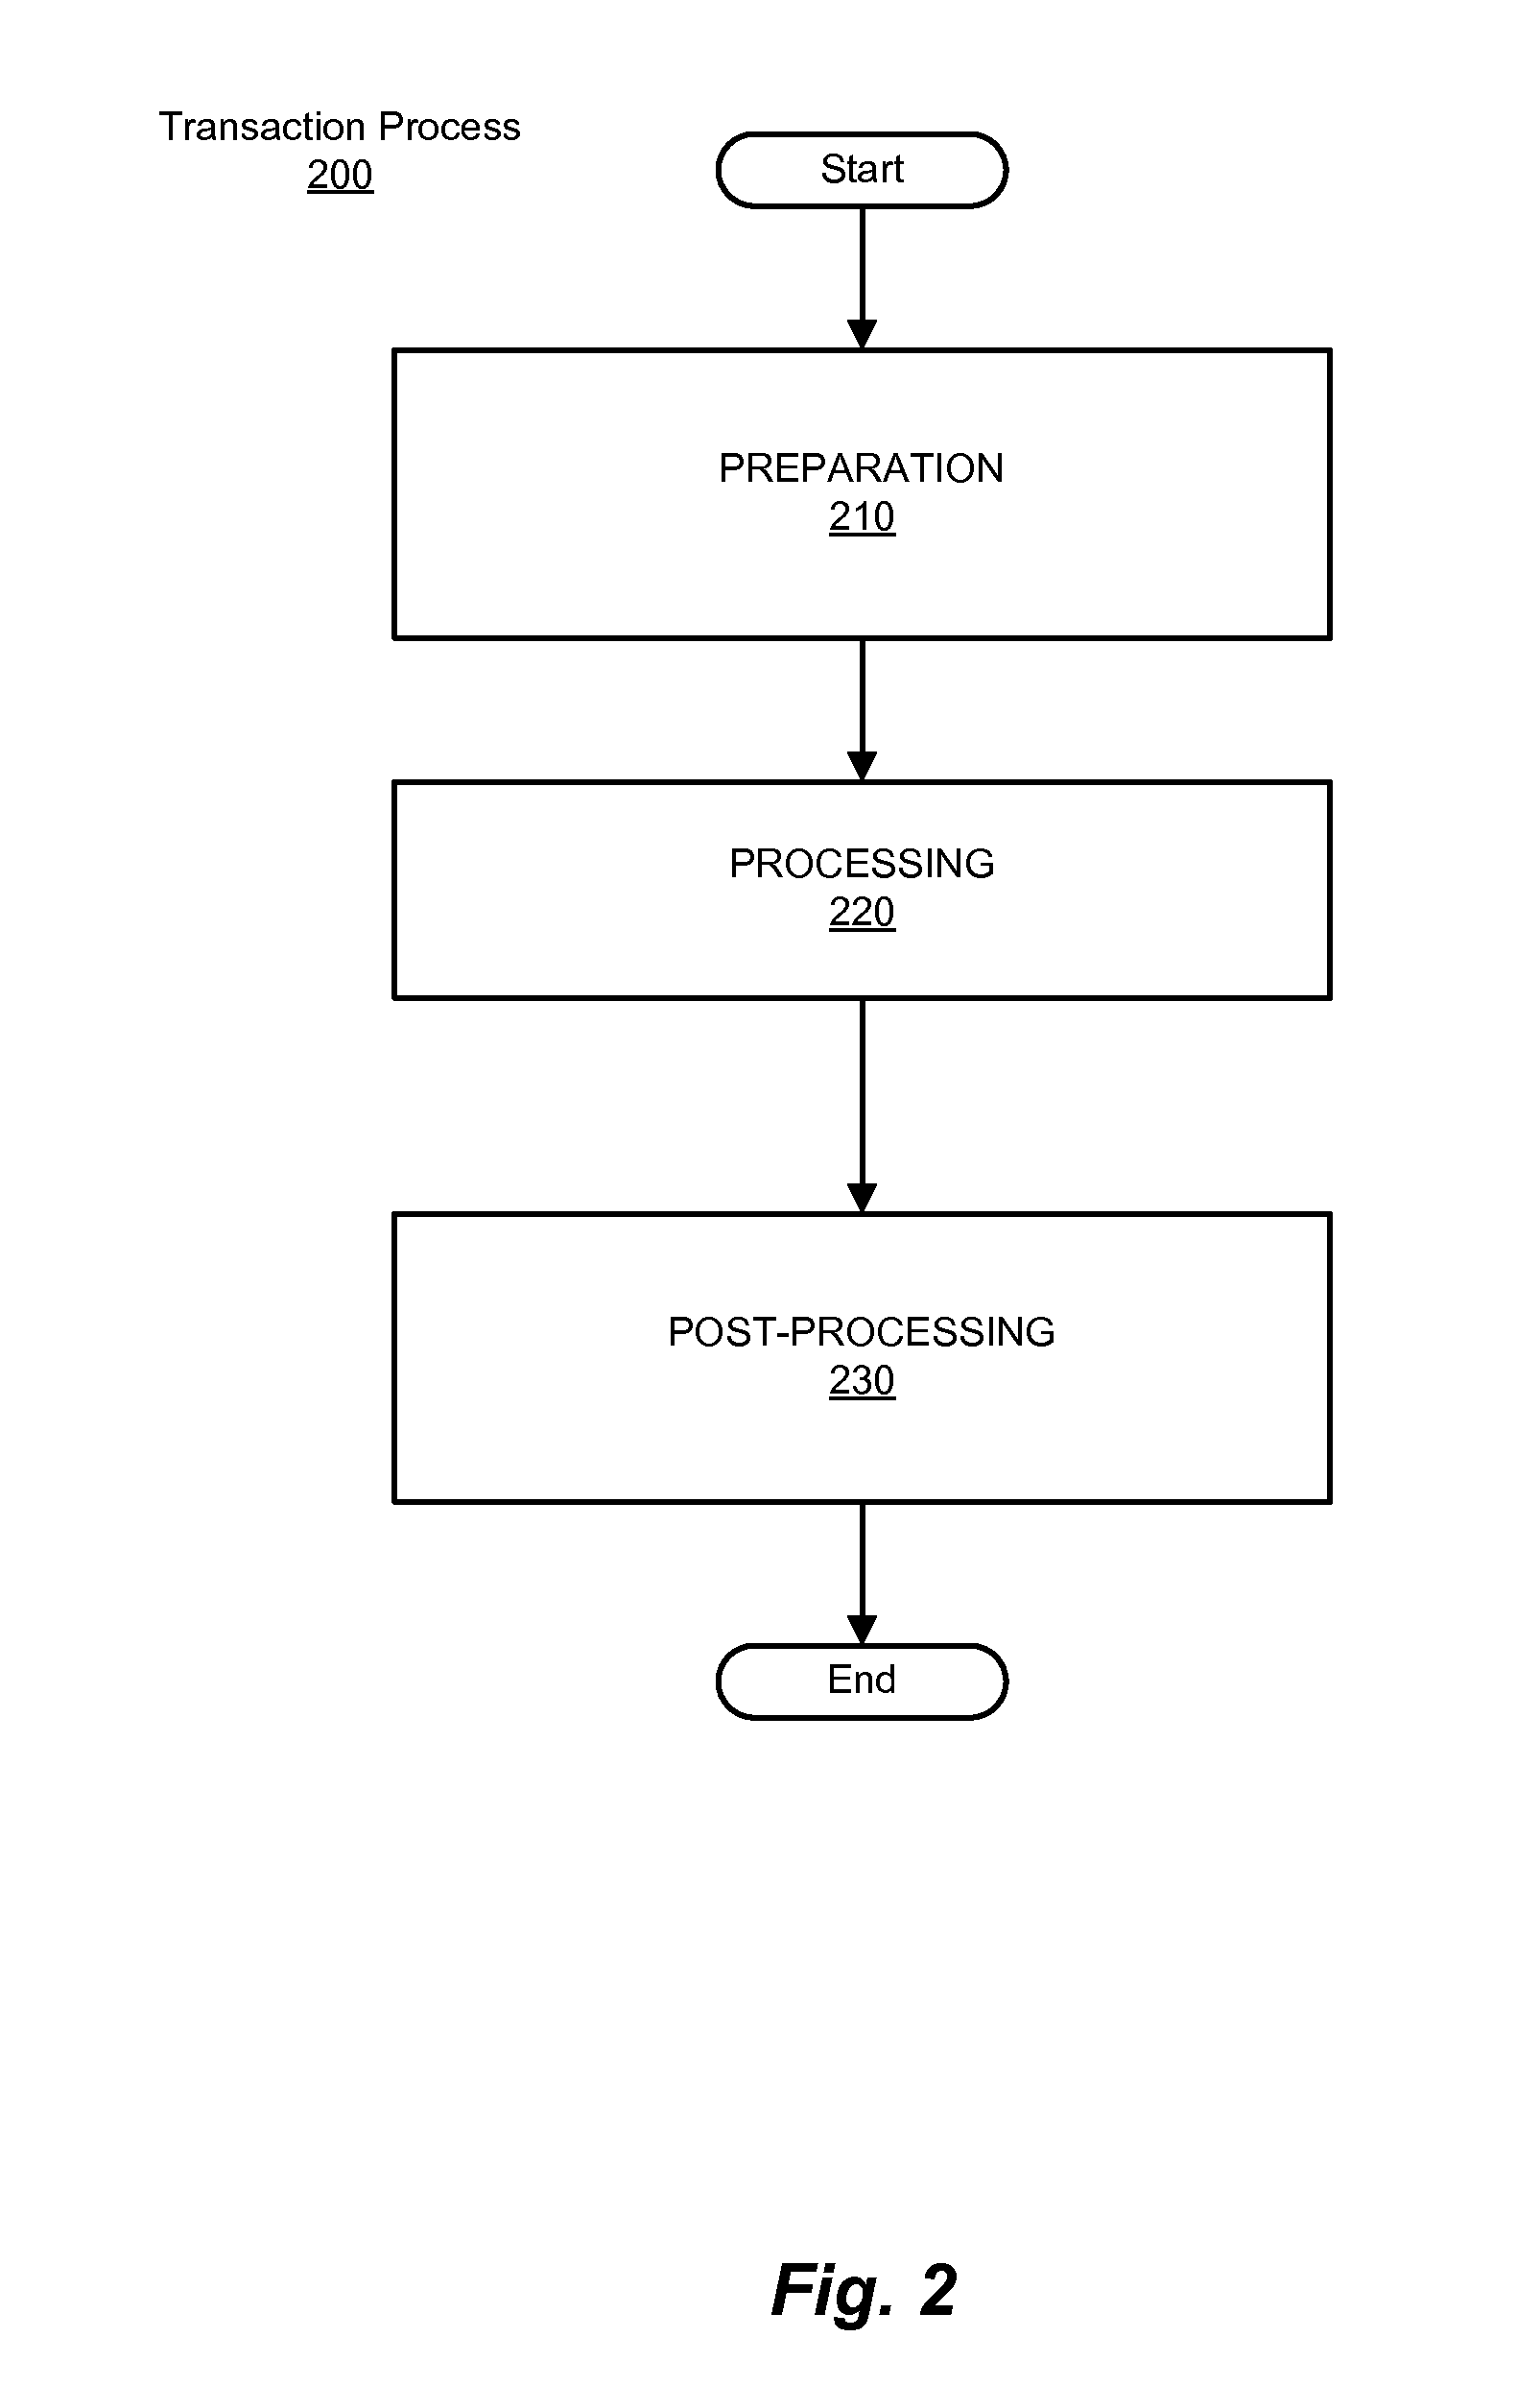 Eventual consistency to resolve subscriber sharing relationships in a distributed system